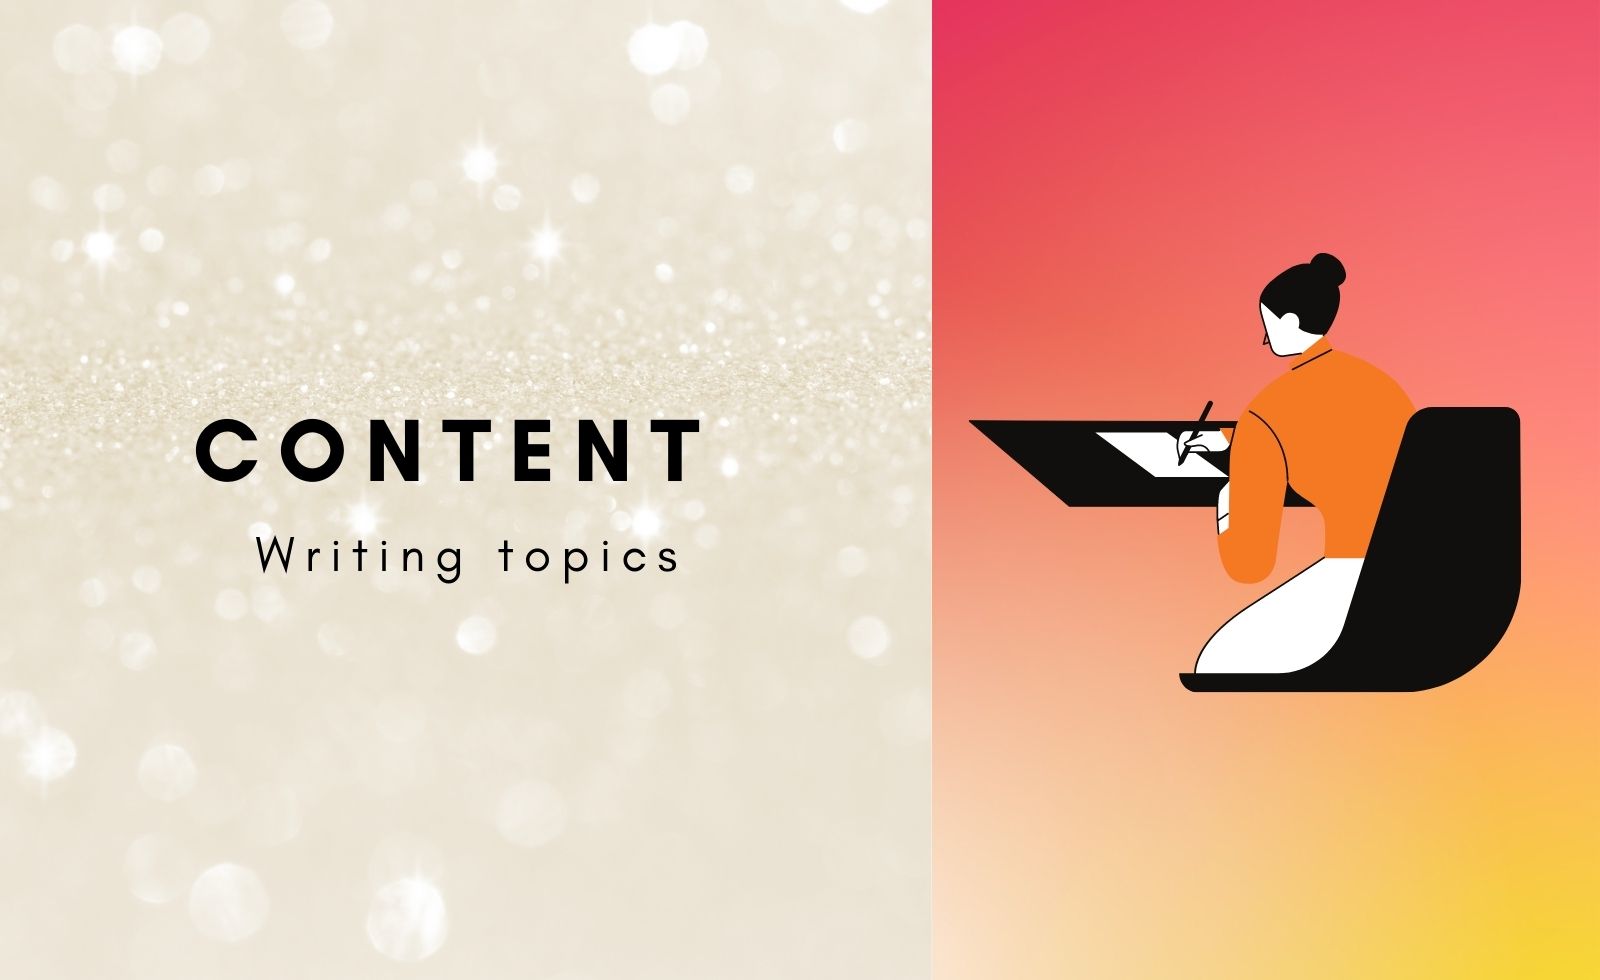 Content writing topics for practice